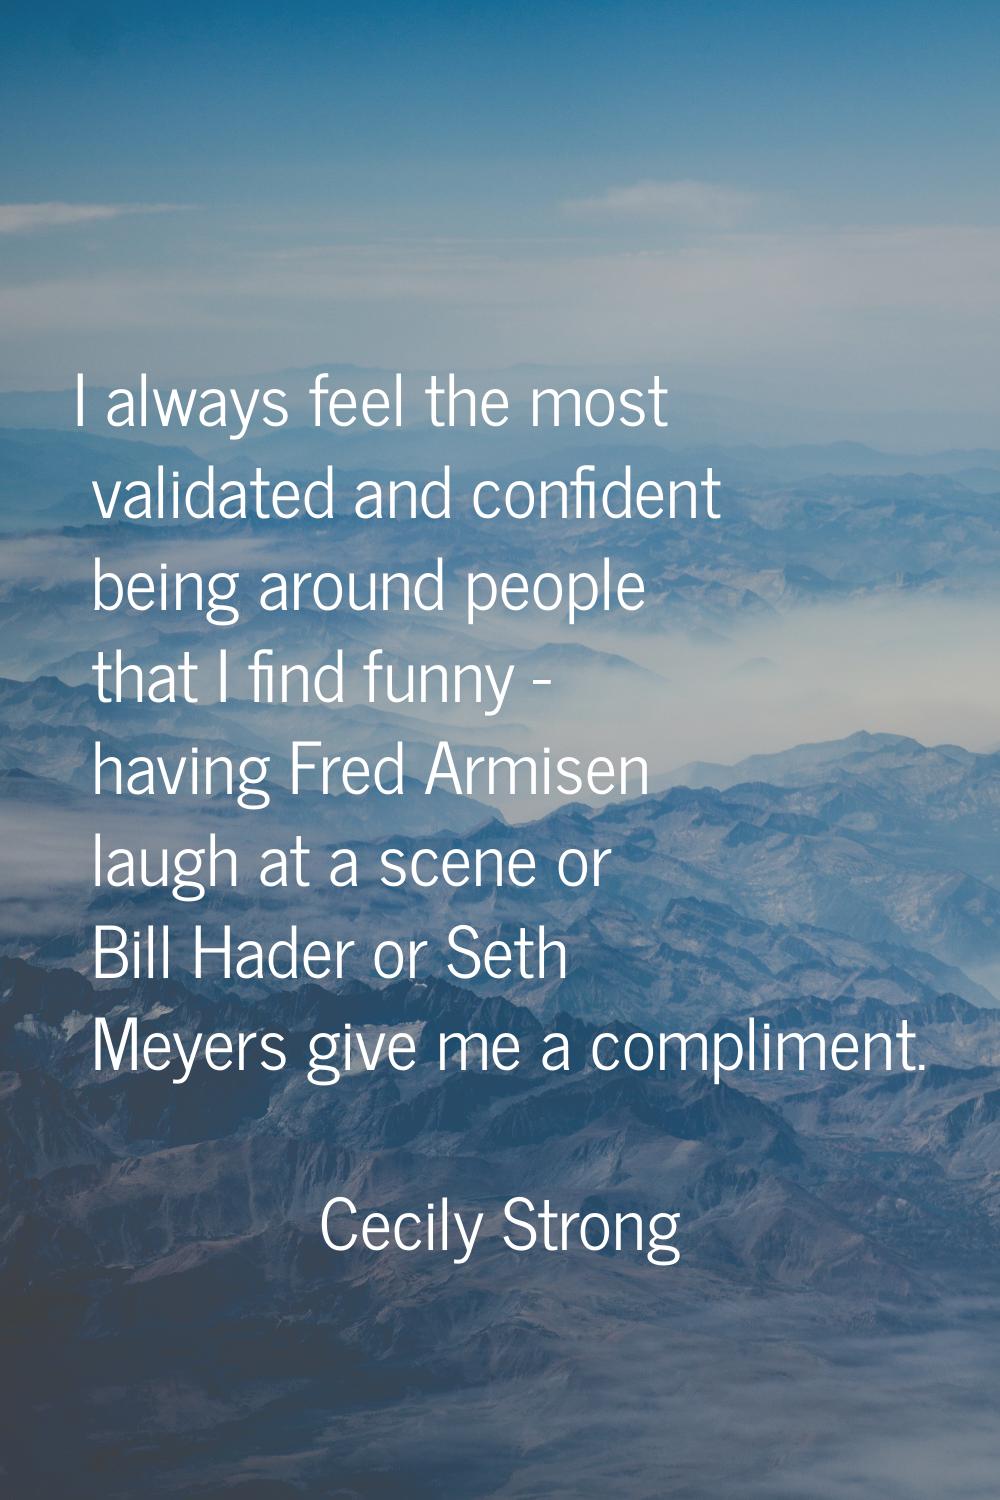 I always feel the most validated and confident being around people that I find funny - having Fred 